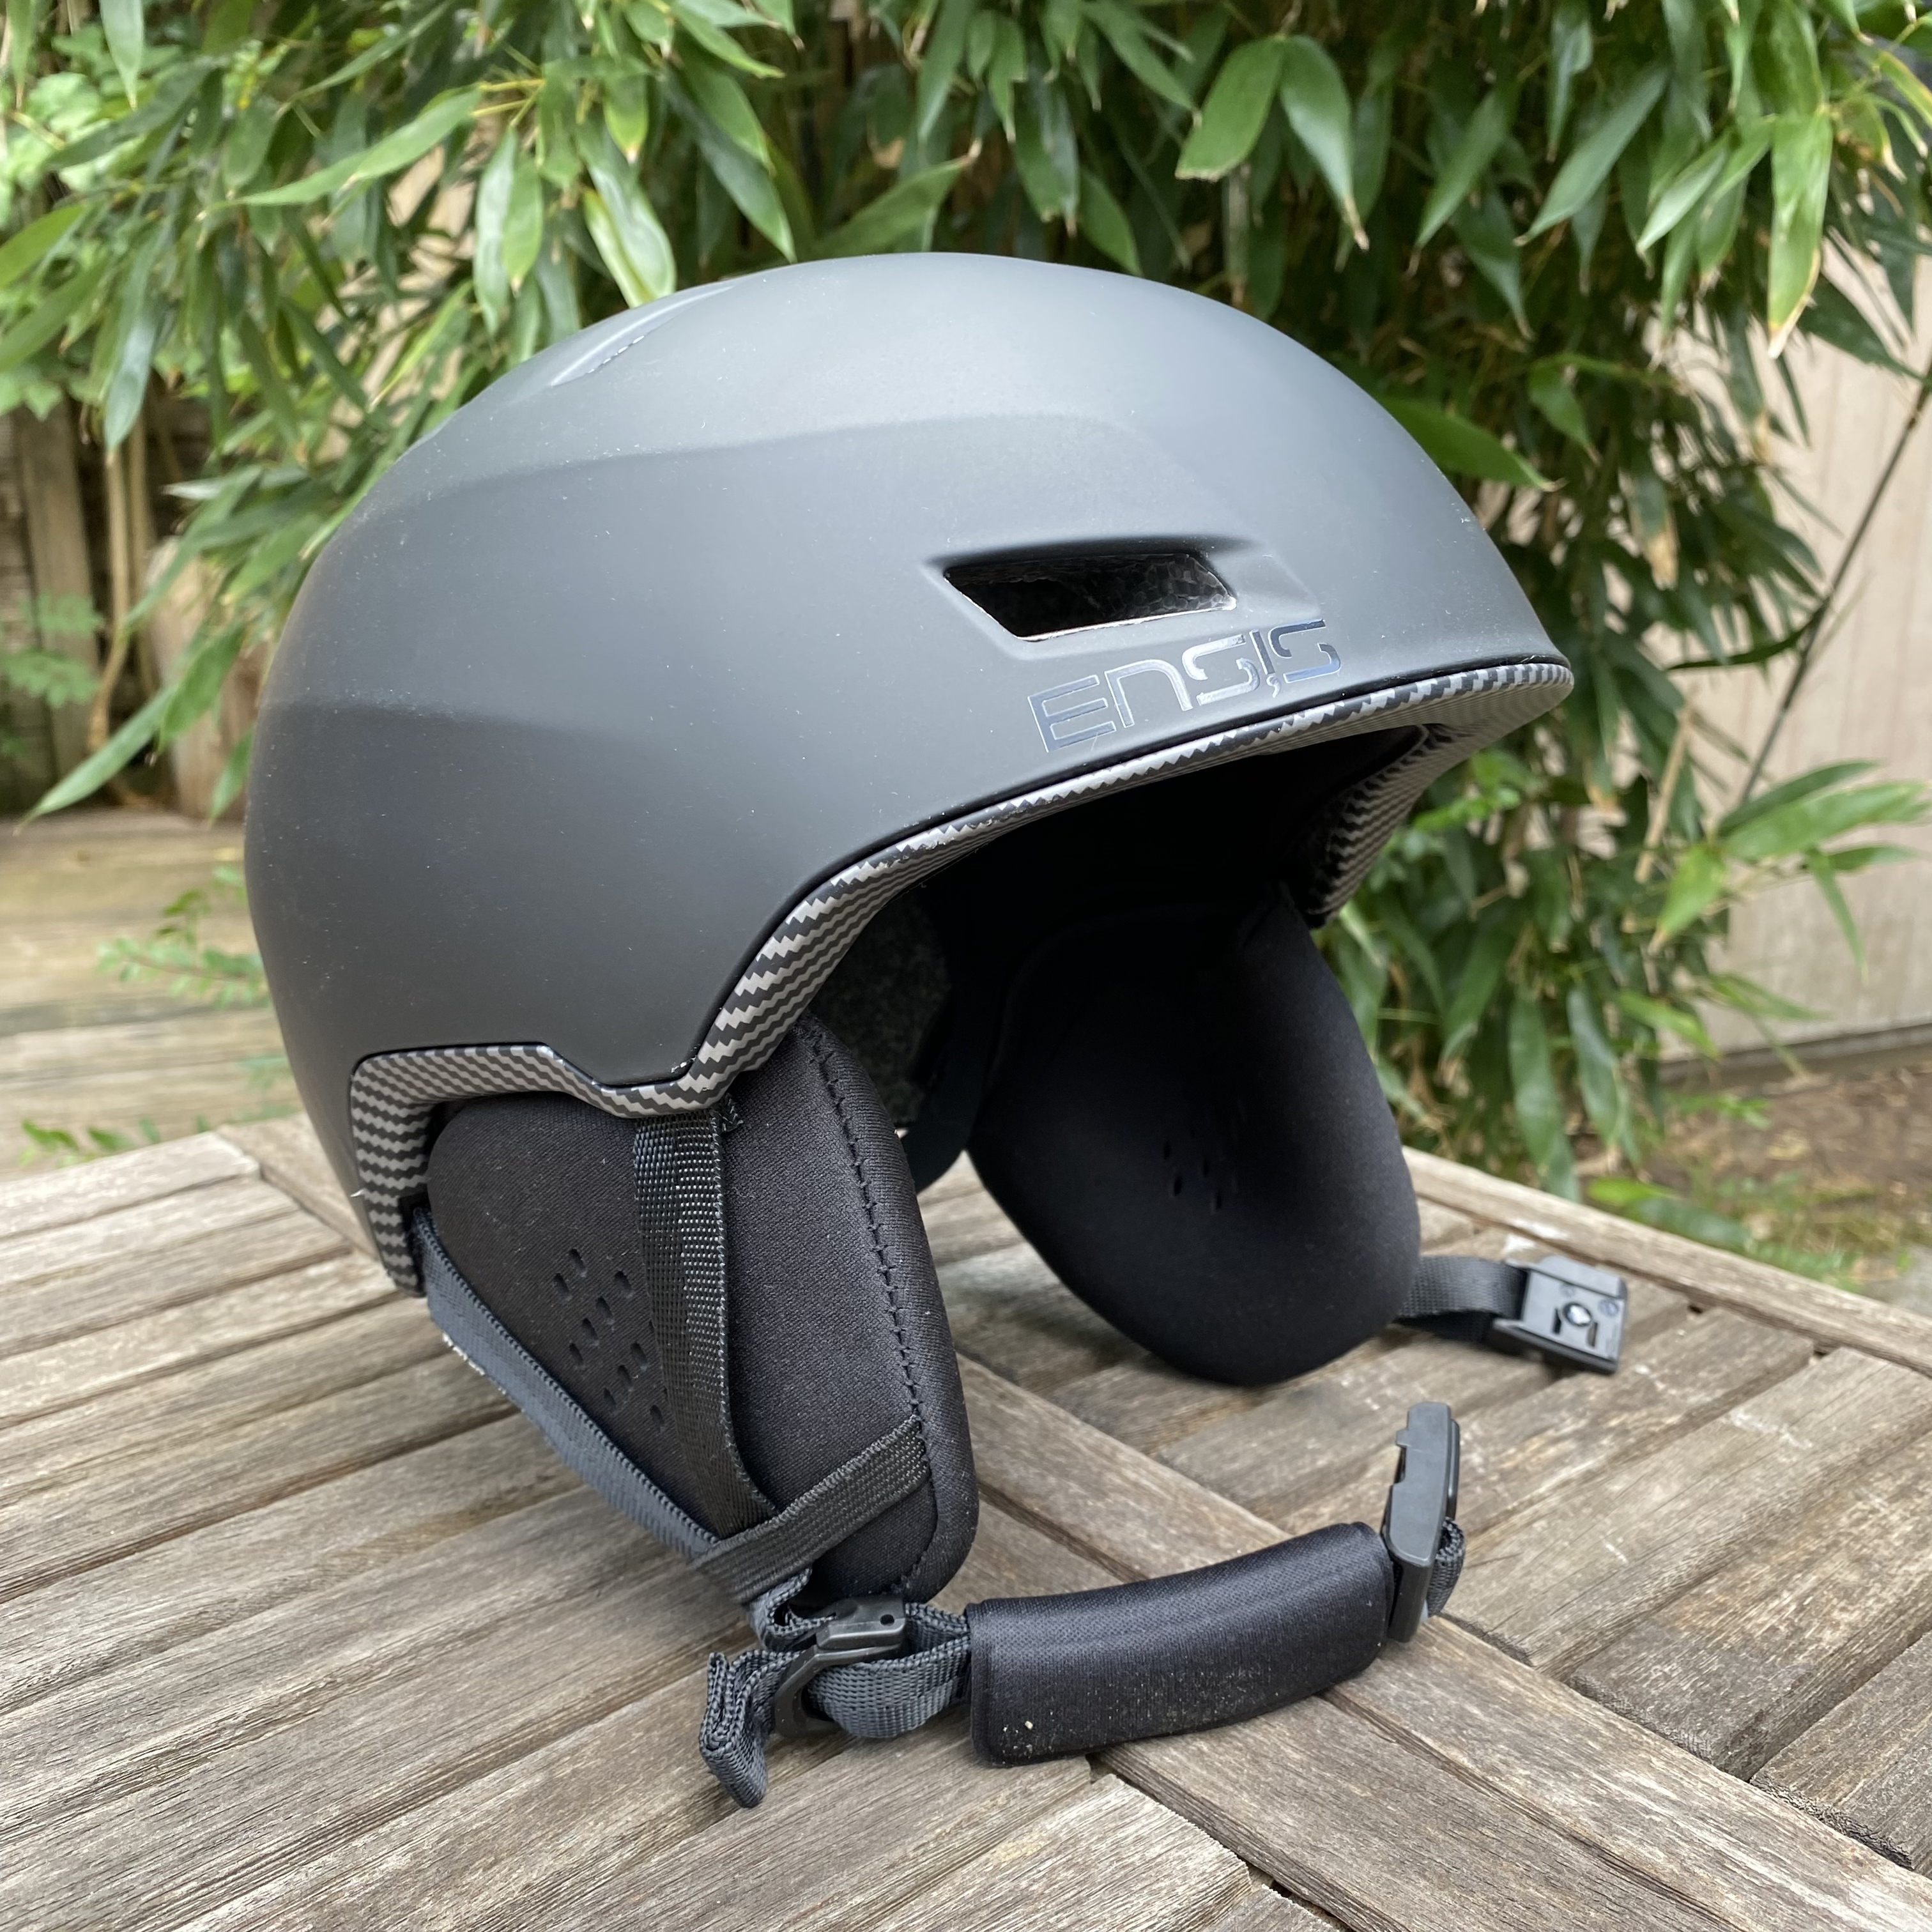 Ensis Double Shell Helm Test